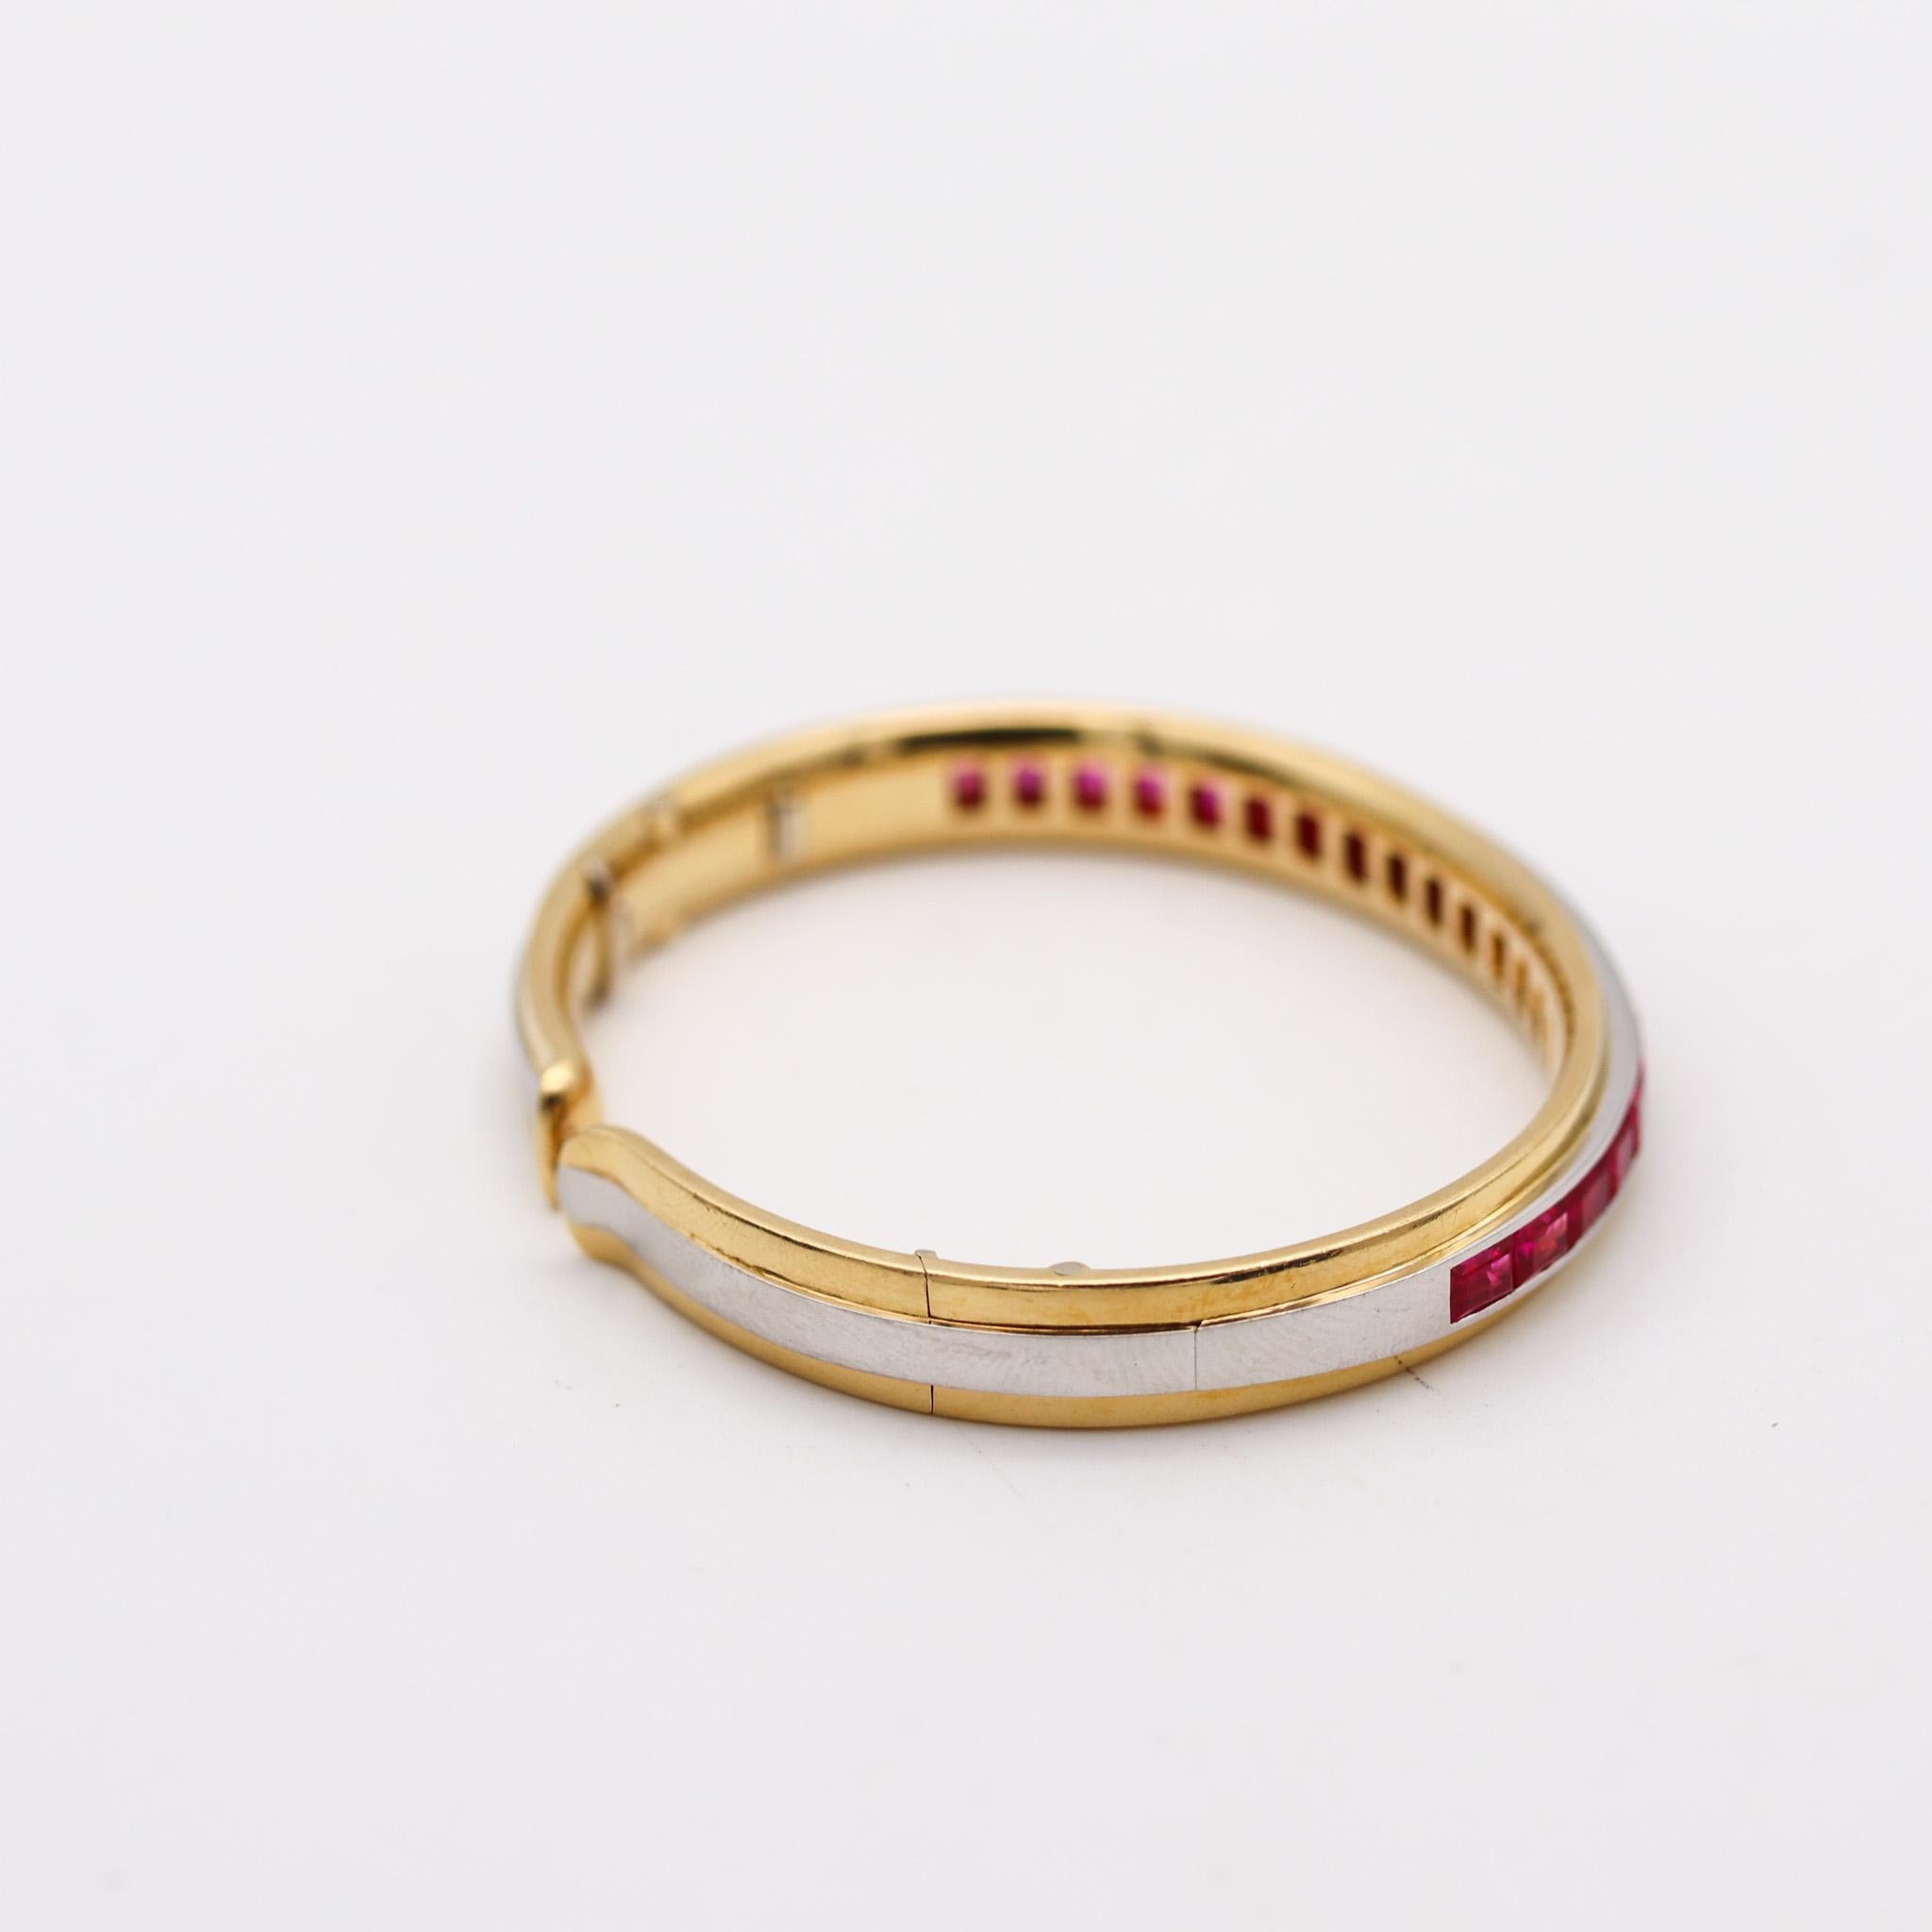 Hemmerle Bangle Bracelet In 18Kt Gold And Platinum With 22.65 Ctw Red Rubies In Excellent Condition For Sale In Miami, FL